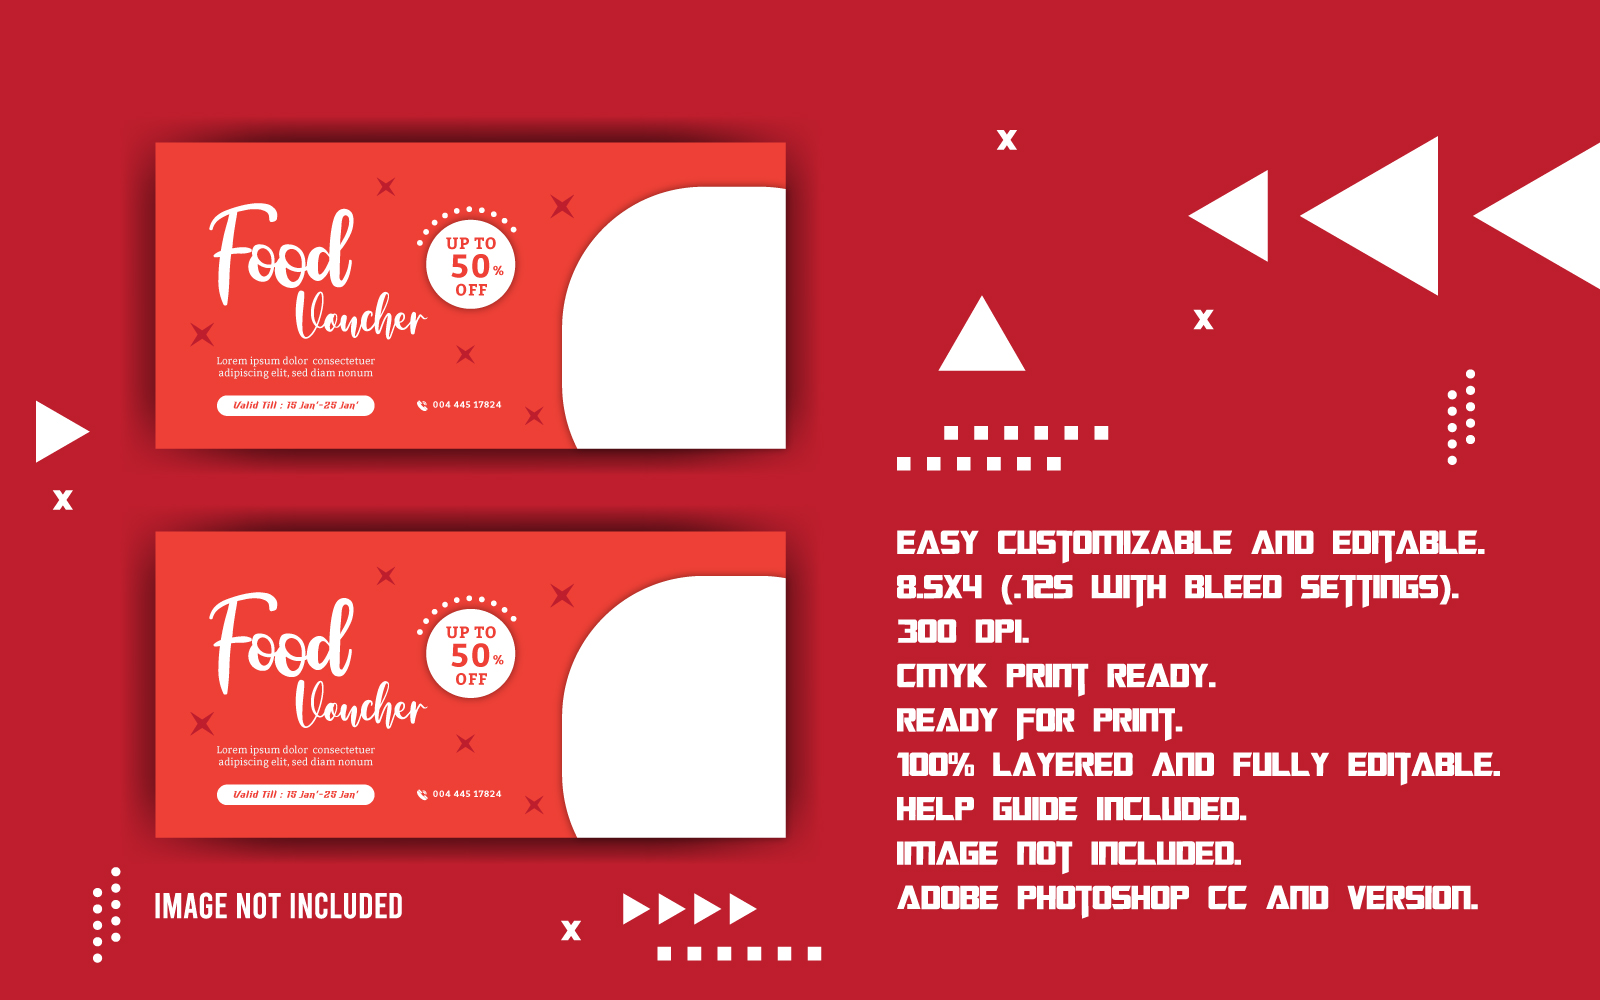 Promotional Food Discount Voucher - Corporate Identity Template